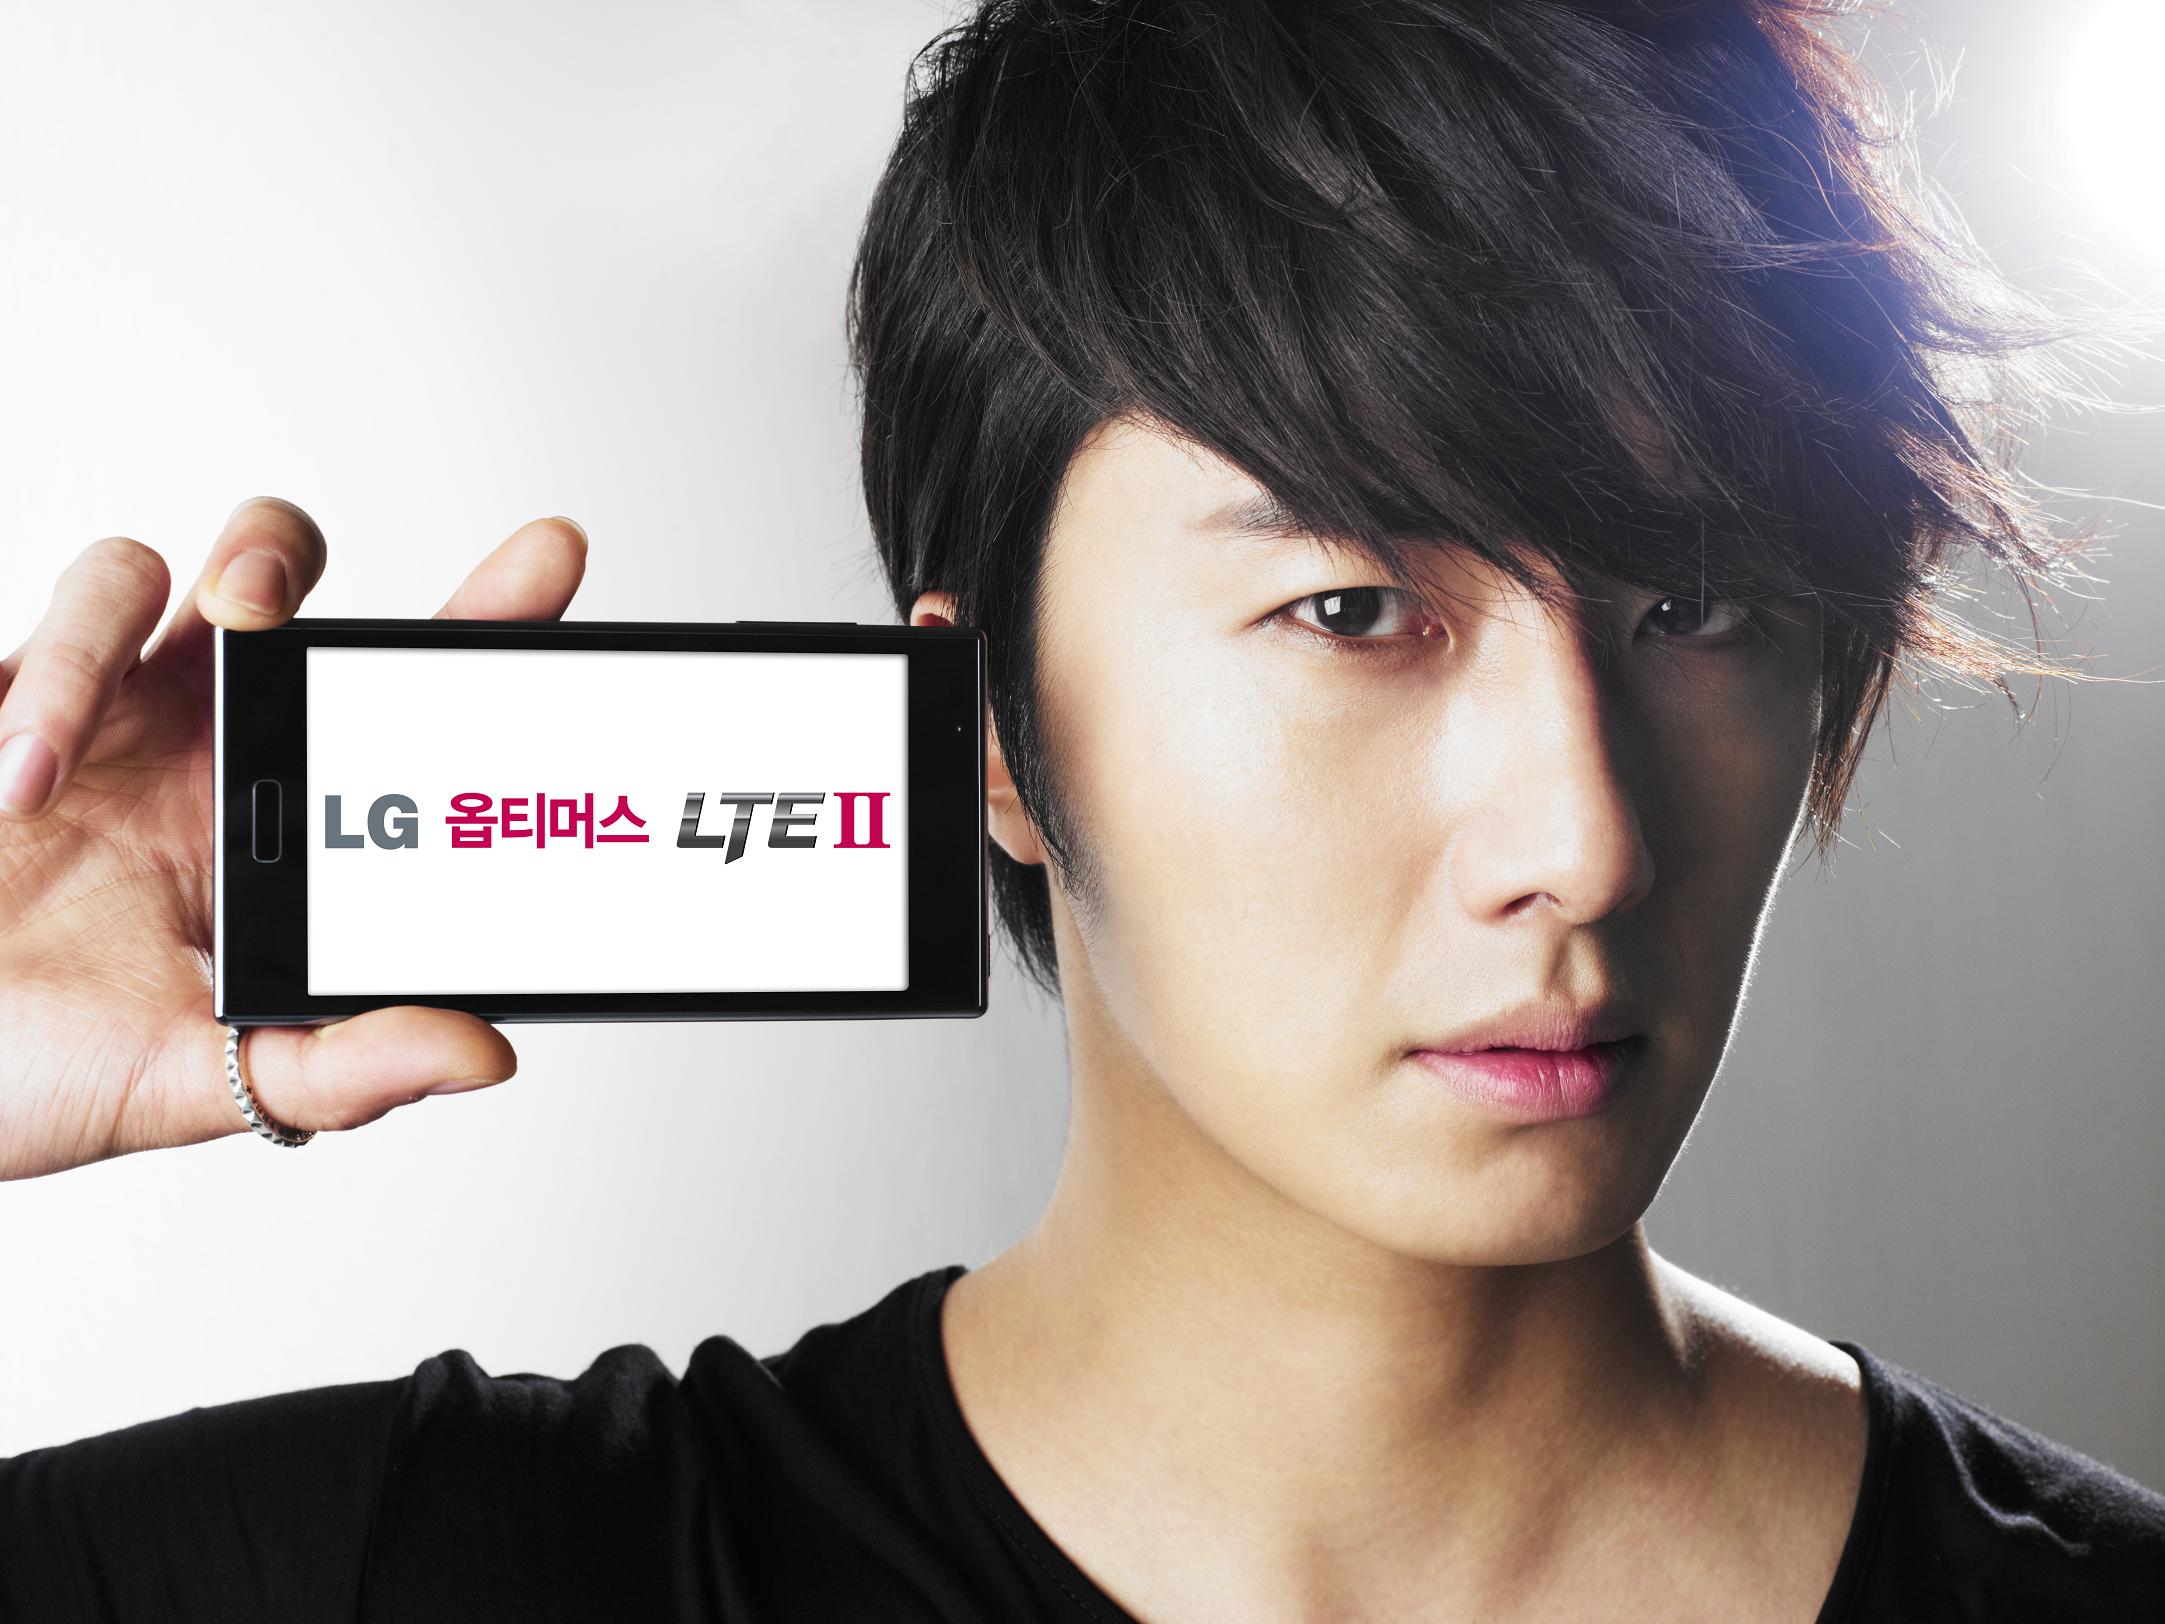 File Jung Il Woo with LG Optimus LTE 2  2  jpg   Wikimedia Commons